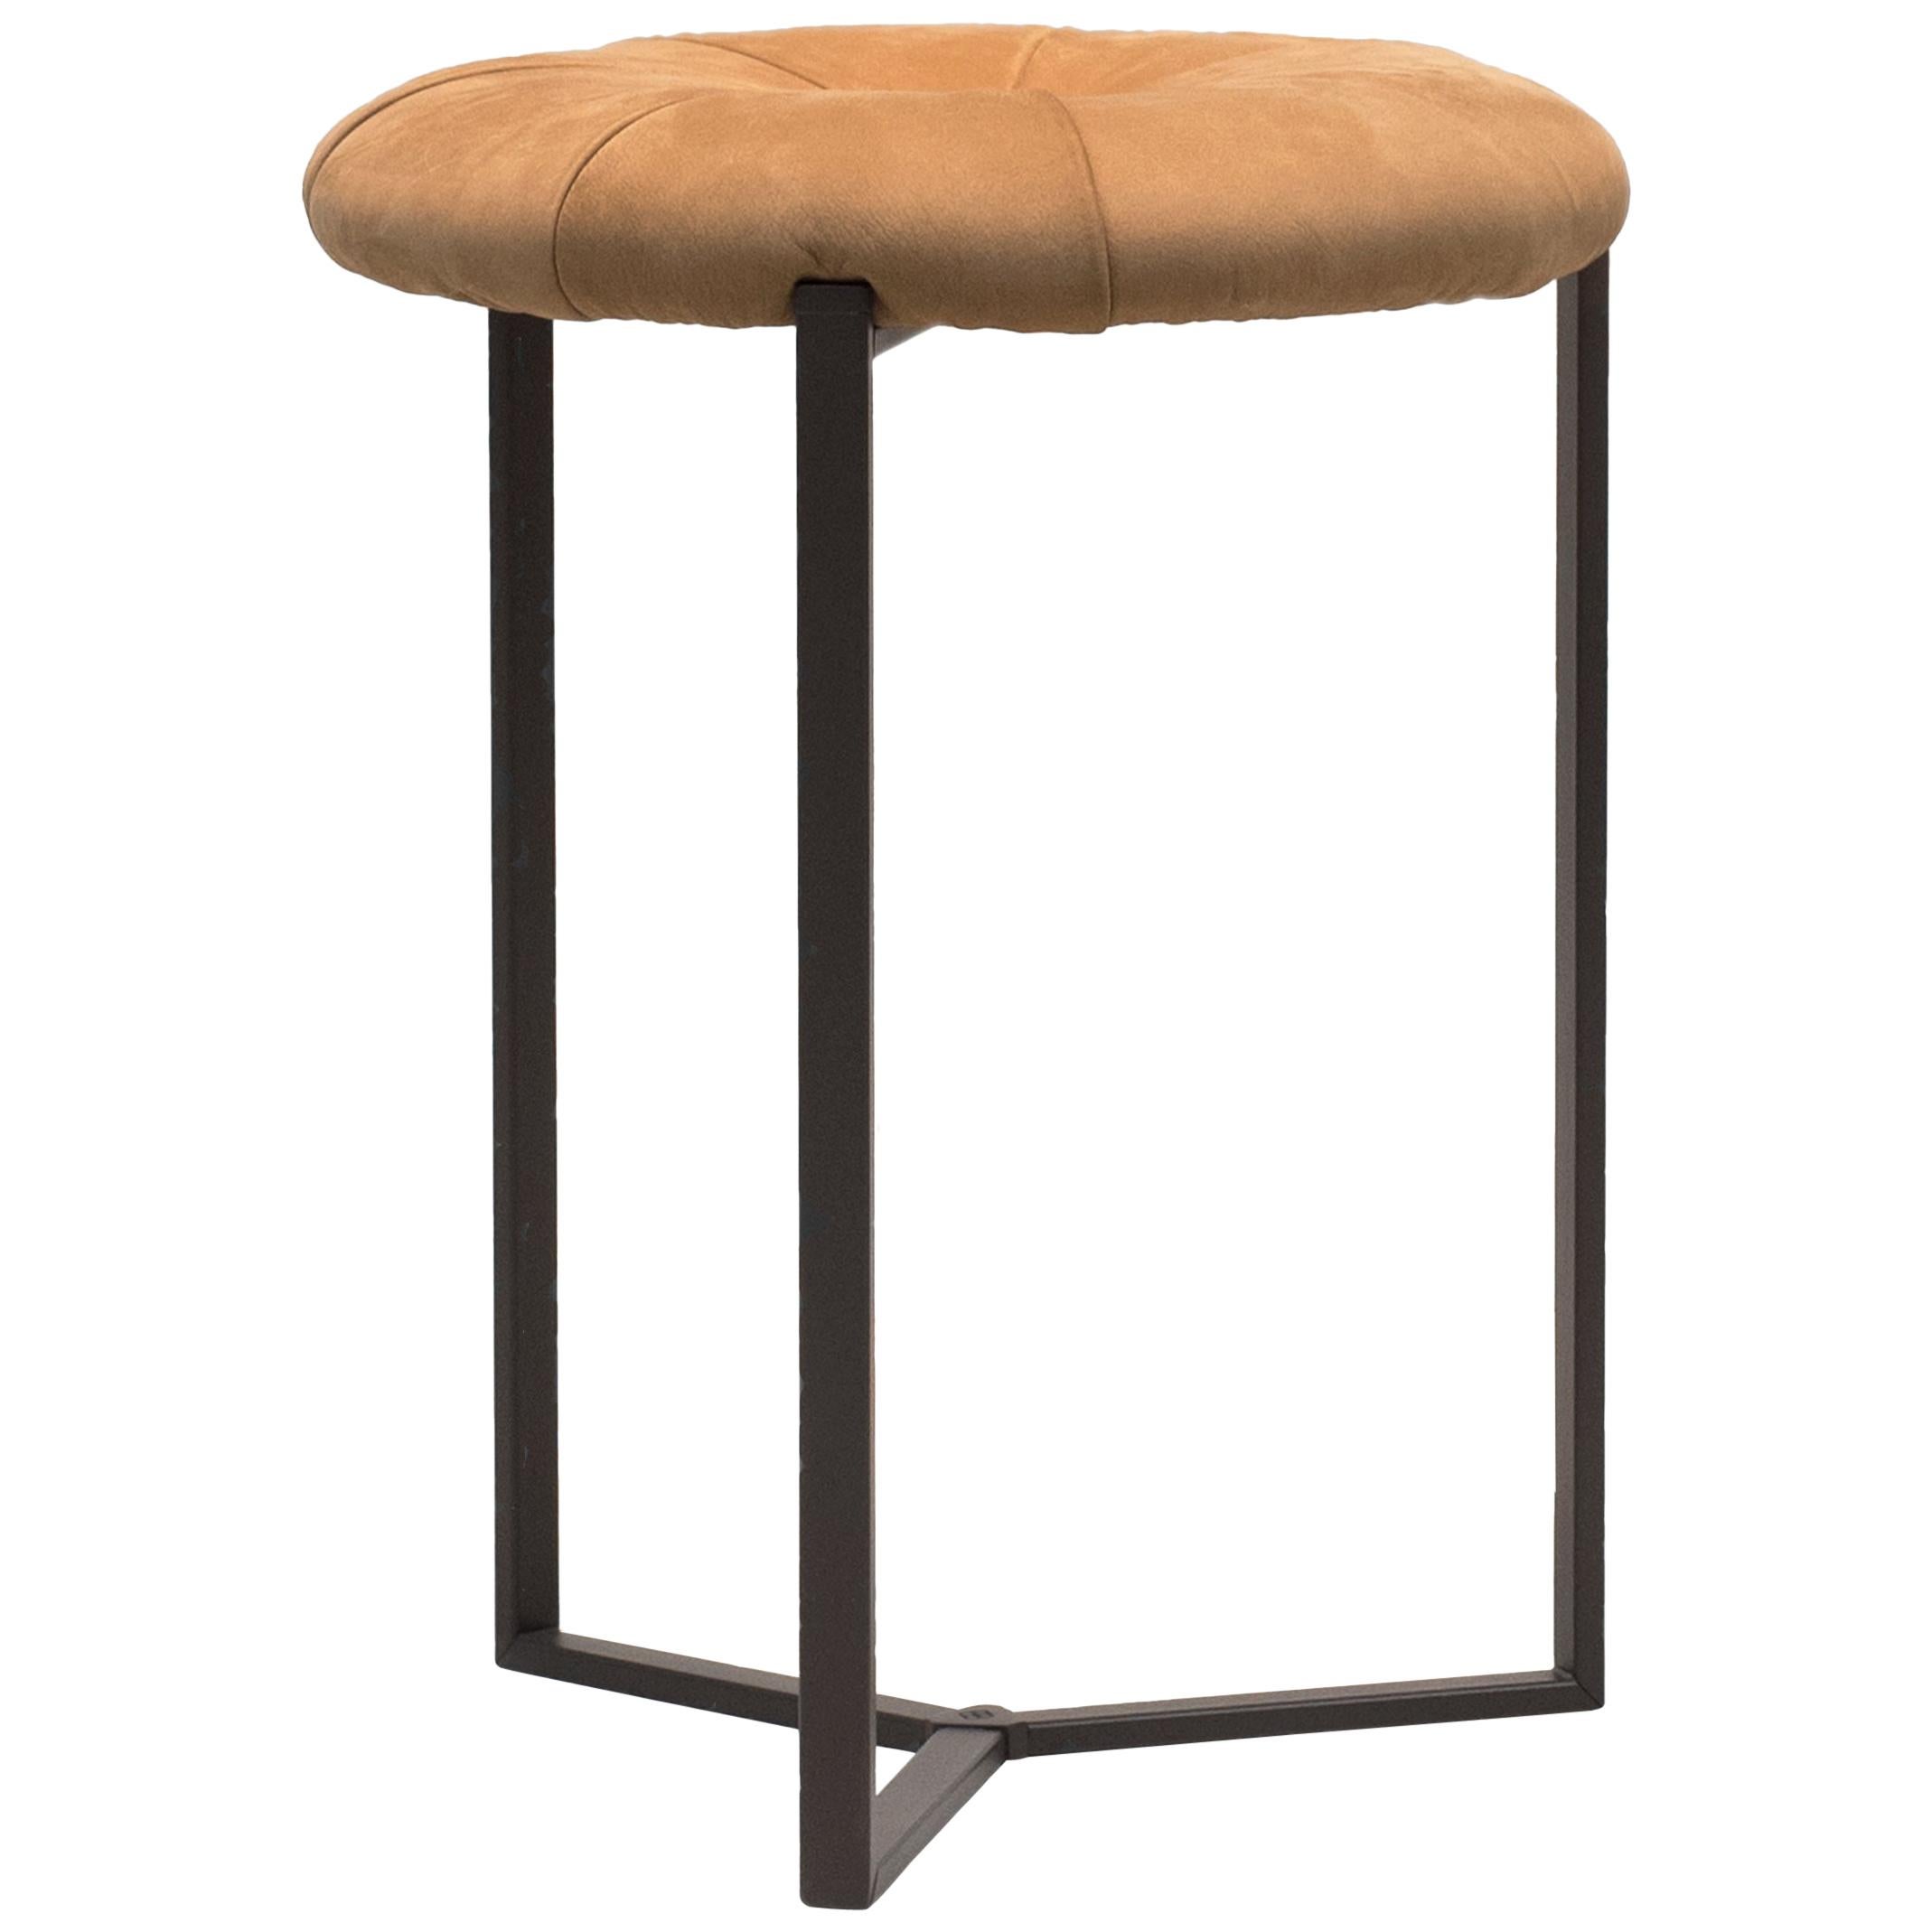 21st Century Chesterfield Three-Leg Ristretto & Beige Suede Kuma S15 Stool  For Sale